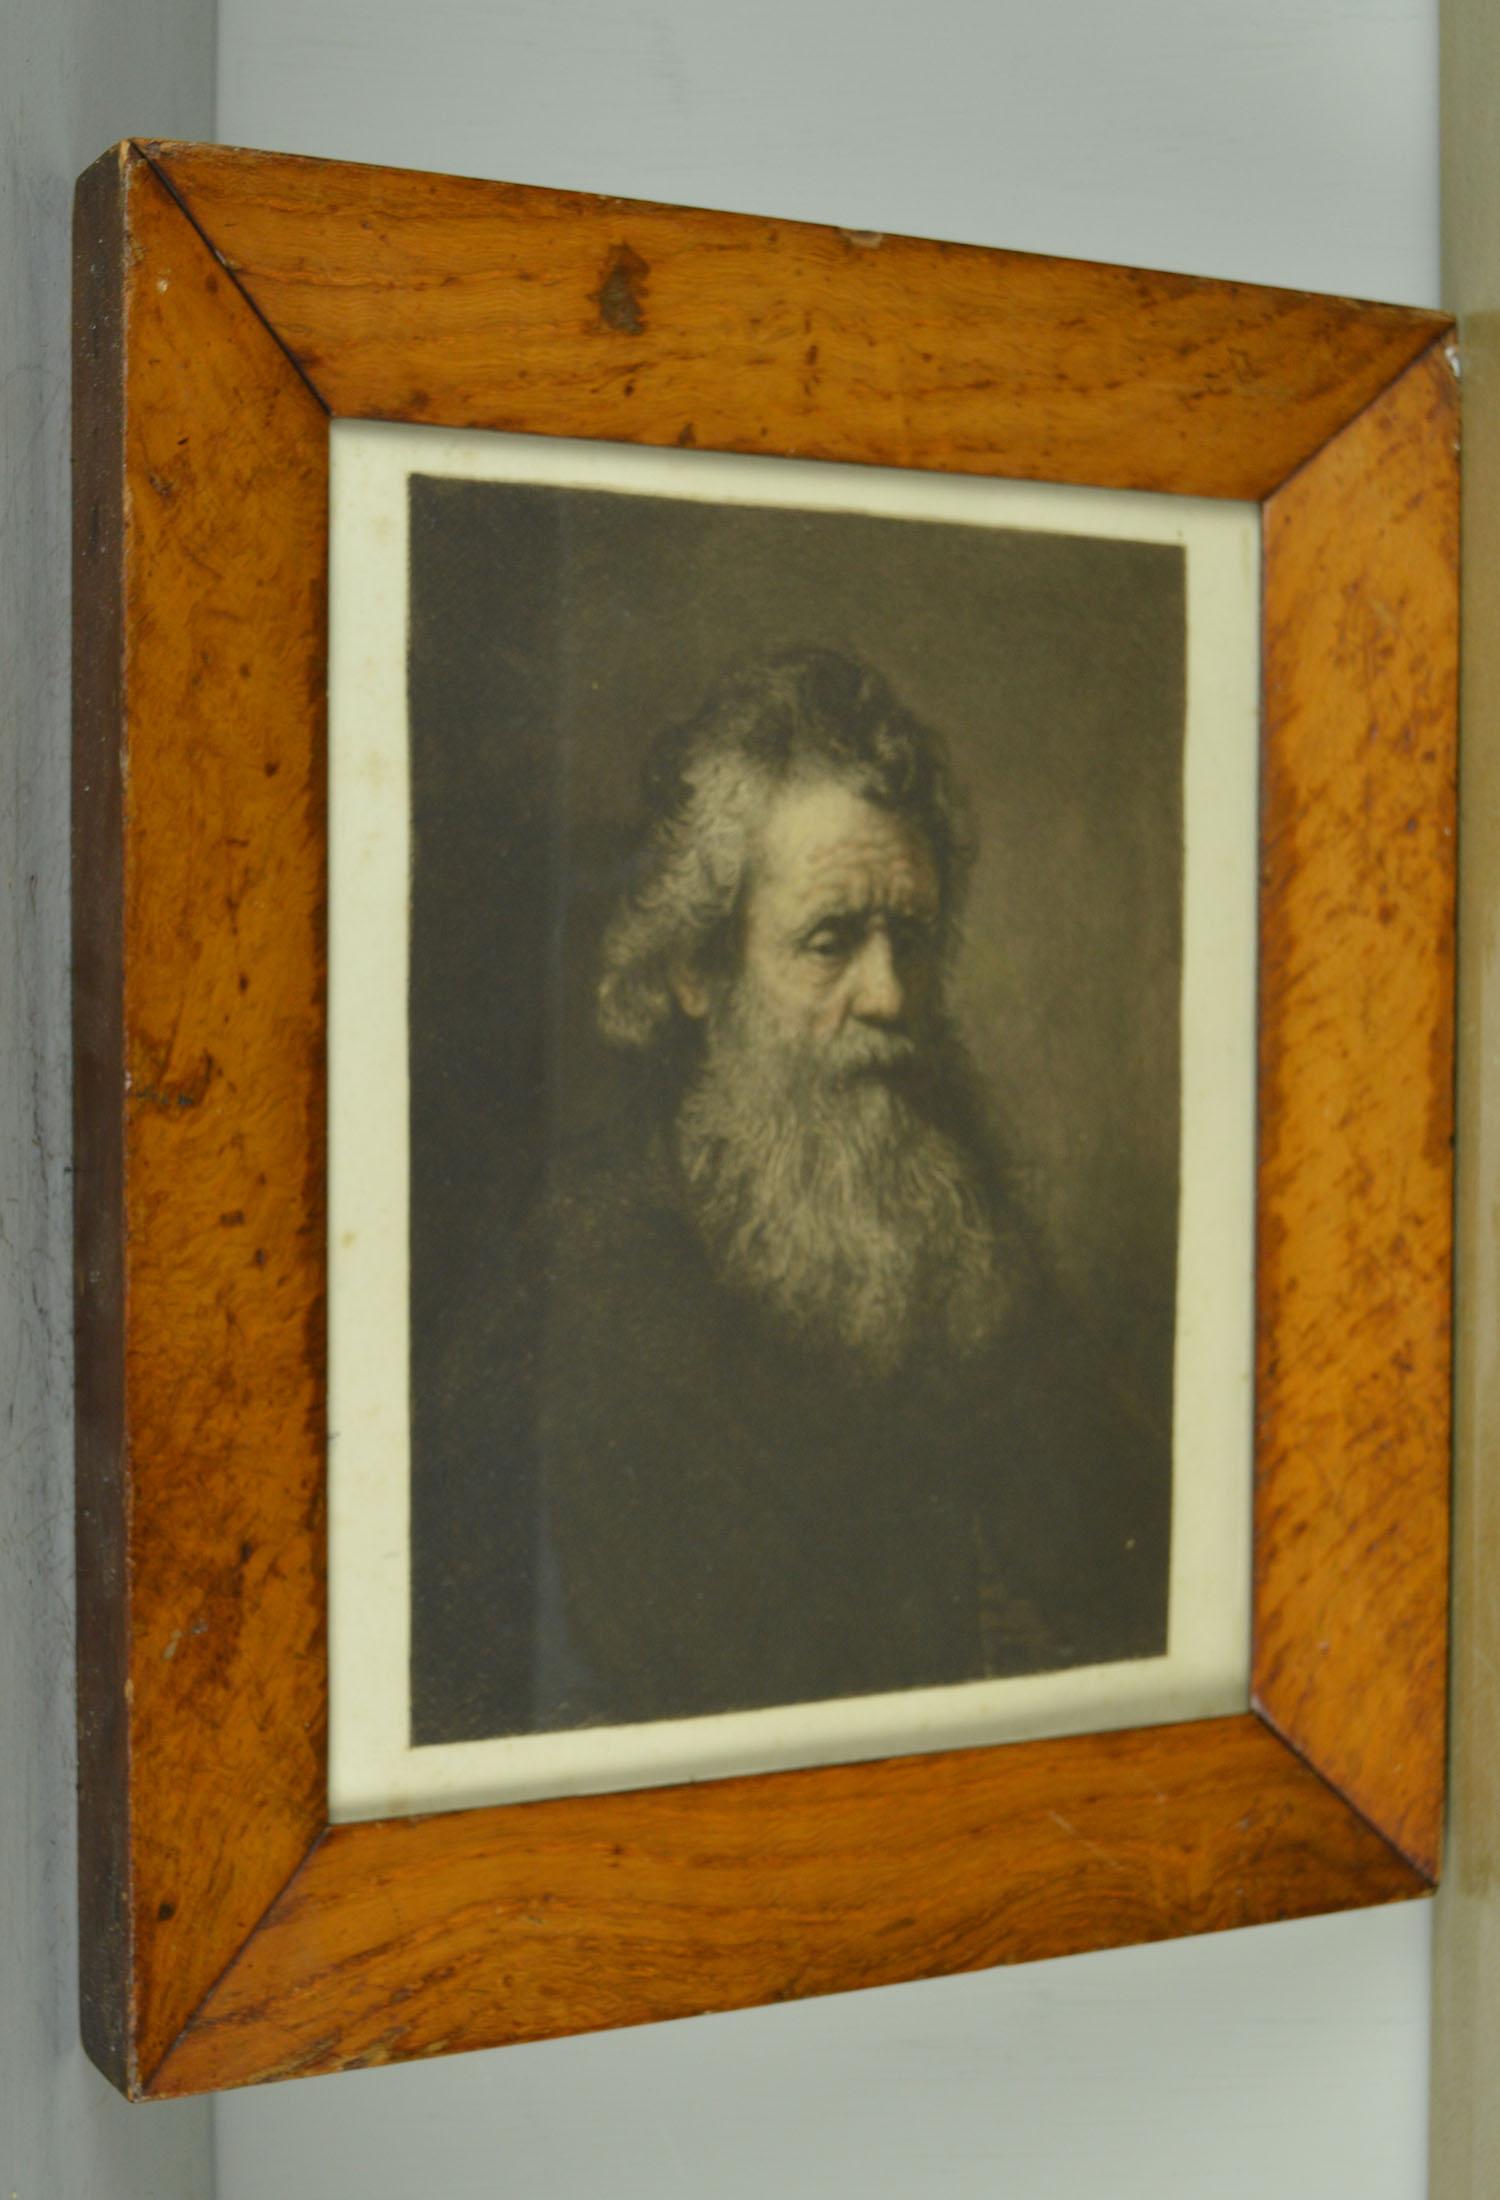 Great image of an old man.

Original etching after a drawing by Rembrandt.

Published, circa 1850.

Presented in an antique maple frame of a similar date.

The measurement given below is the frame size.
 